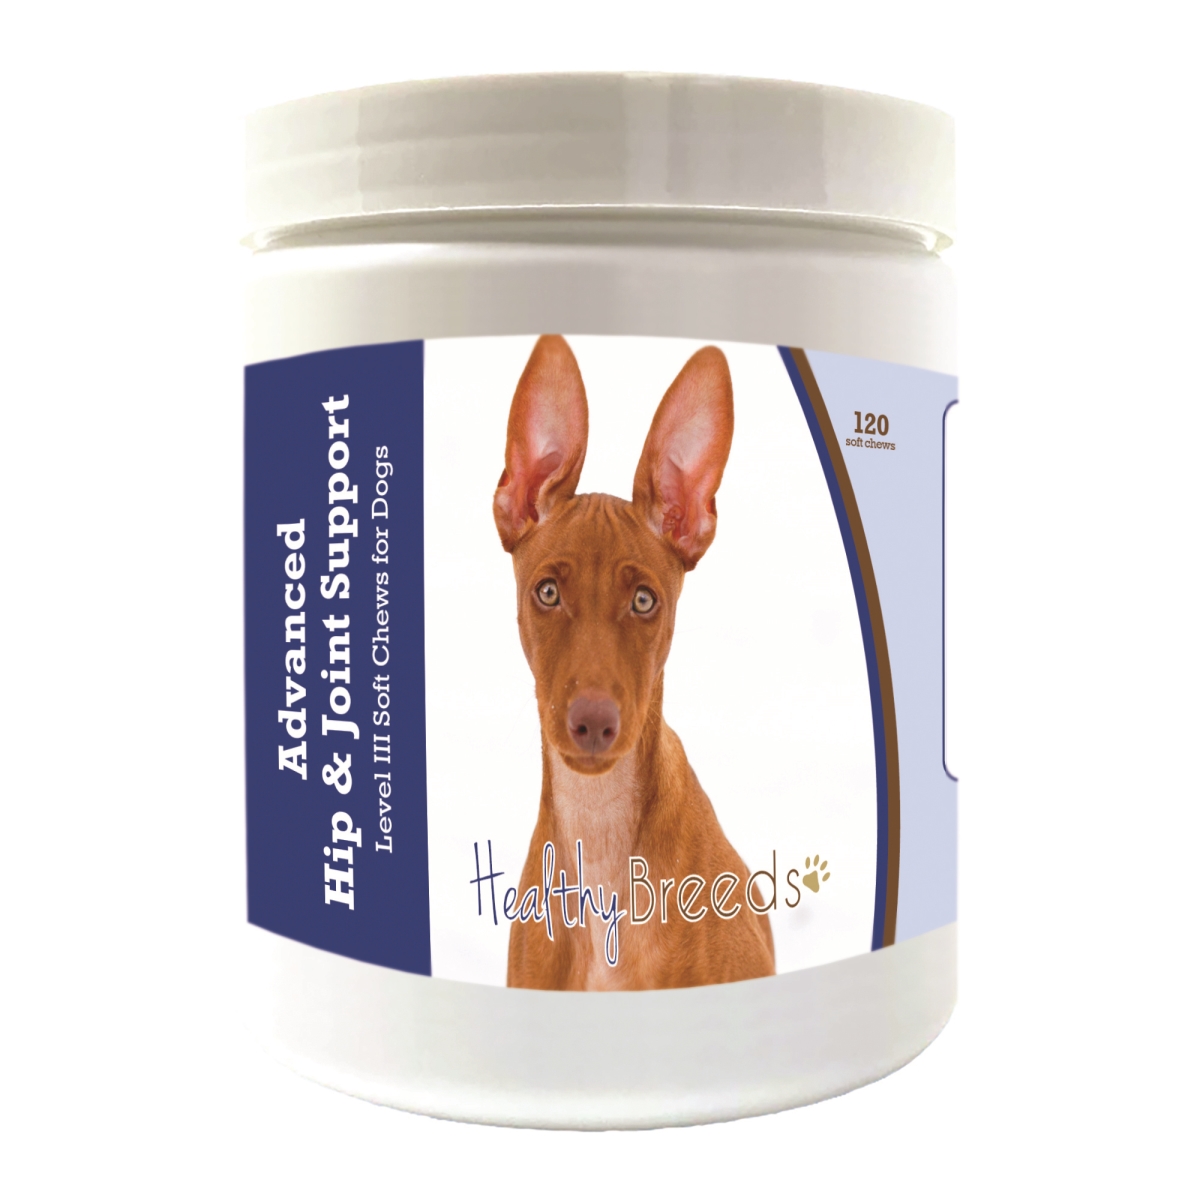 Picture of Healthy Breeds 192959897951 Cirnechi dell Etna Advanced Hip & Joint Support Level III Soft Chews for Dogs